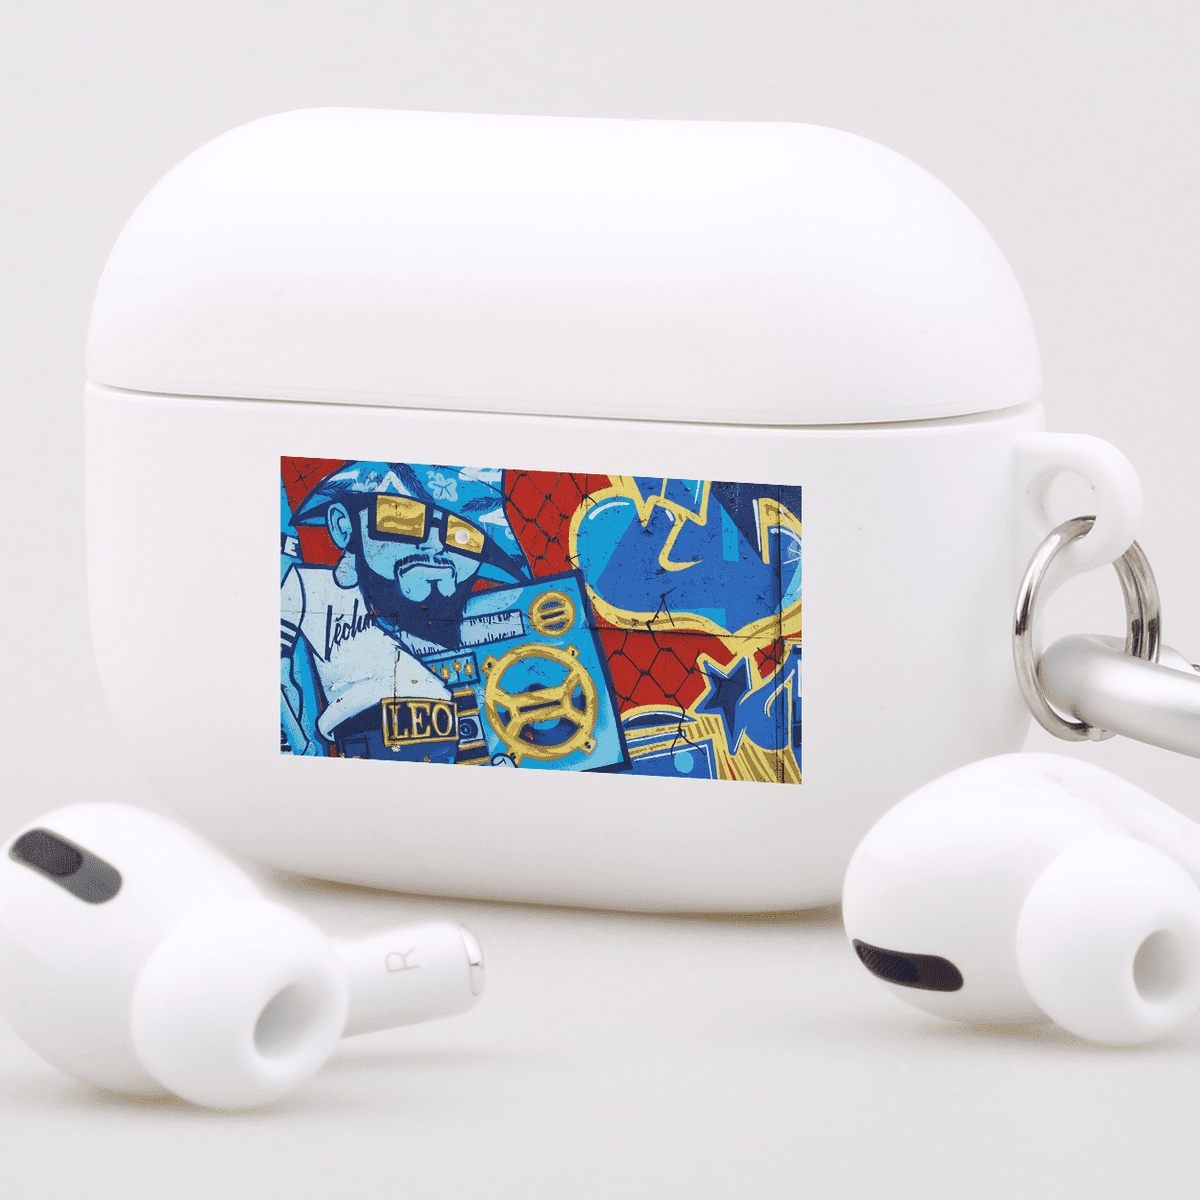 Personalised Airpods Pro 1 & 2, Airpods Pro Custom Case